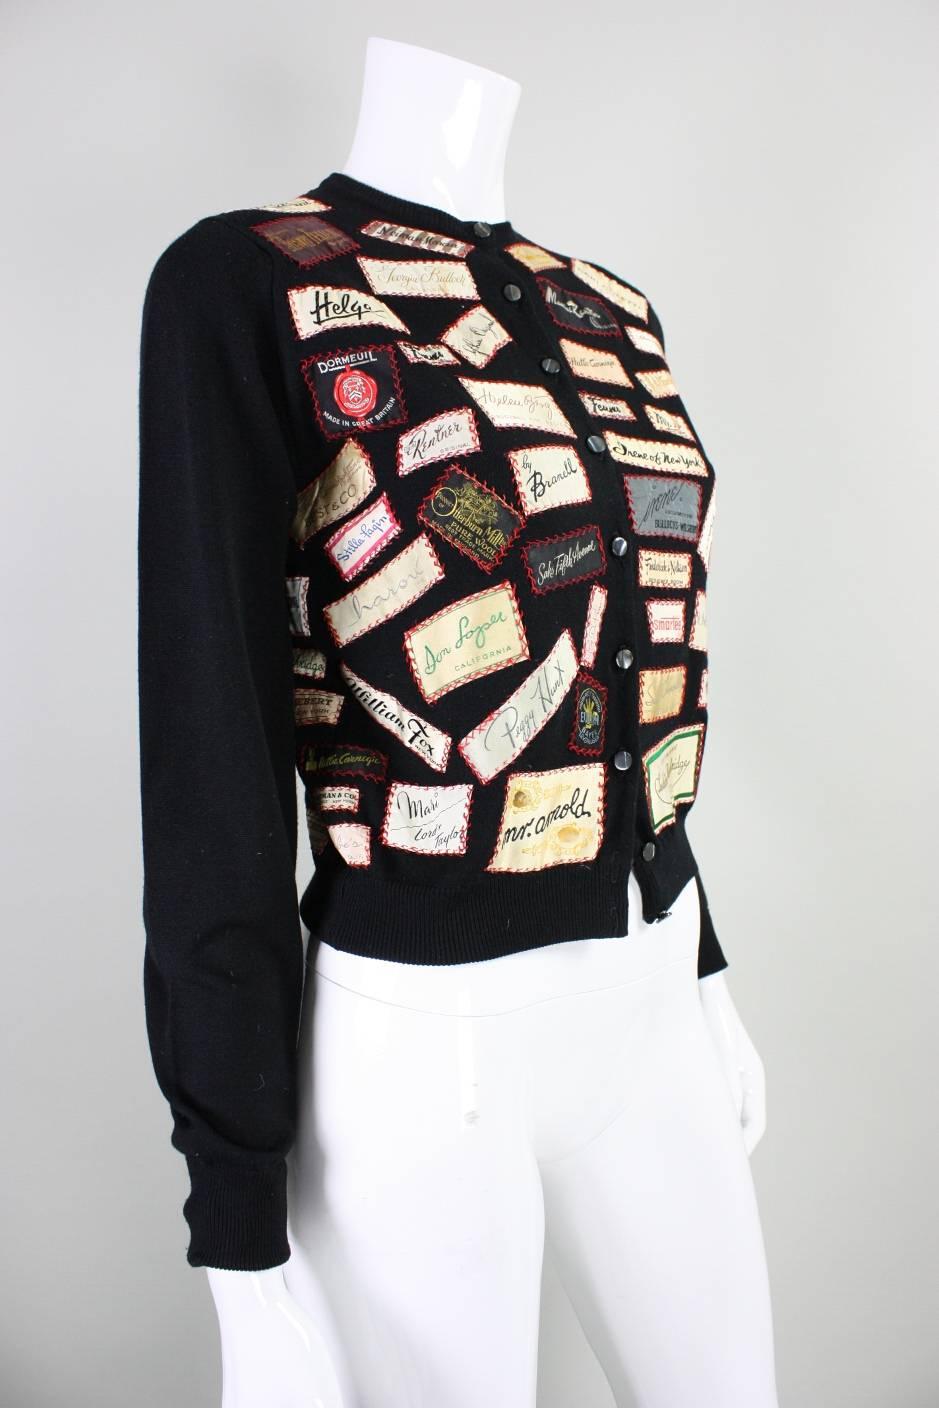 Vintage sweater appears to date to the 1960's.  Cardigan feels to be made of a tightly-woven black acrylic knit and is appliqued with various labels of stores and designers. Applique is hand done in red thread with a decorative stitch.  Cardigan is